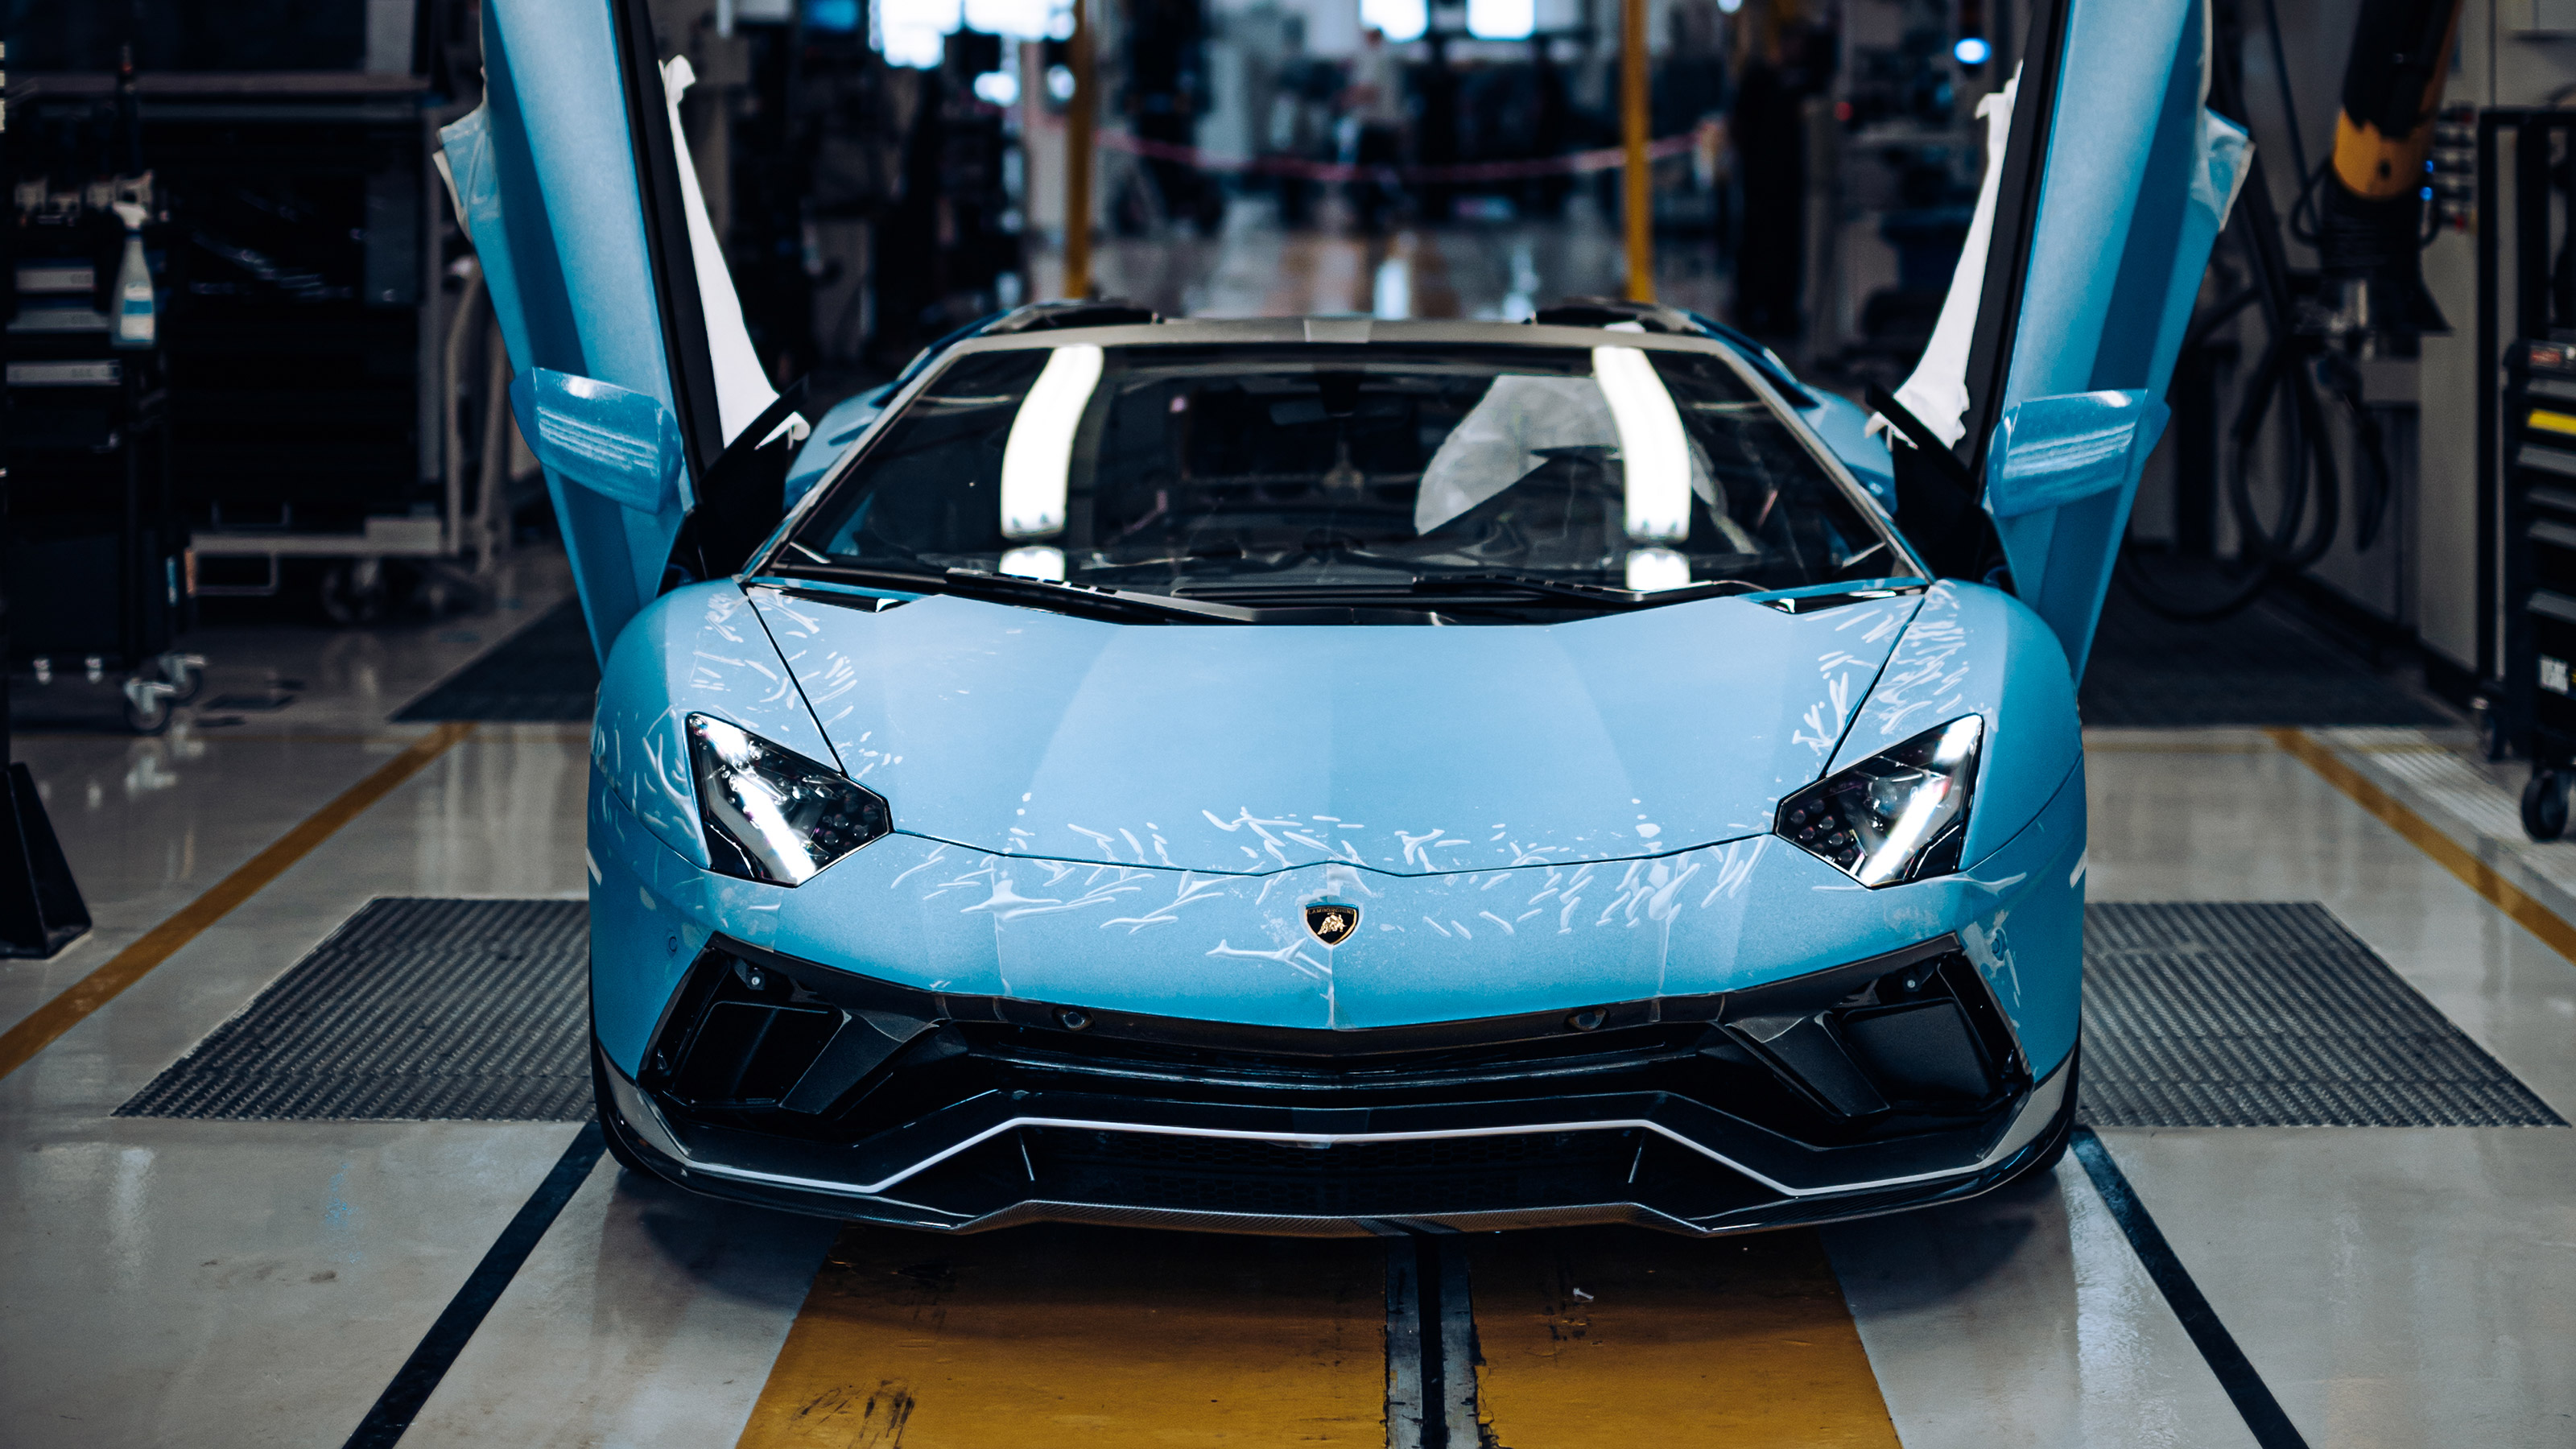 Lamborghini Aventador production ends after 11 years | evo